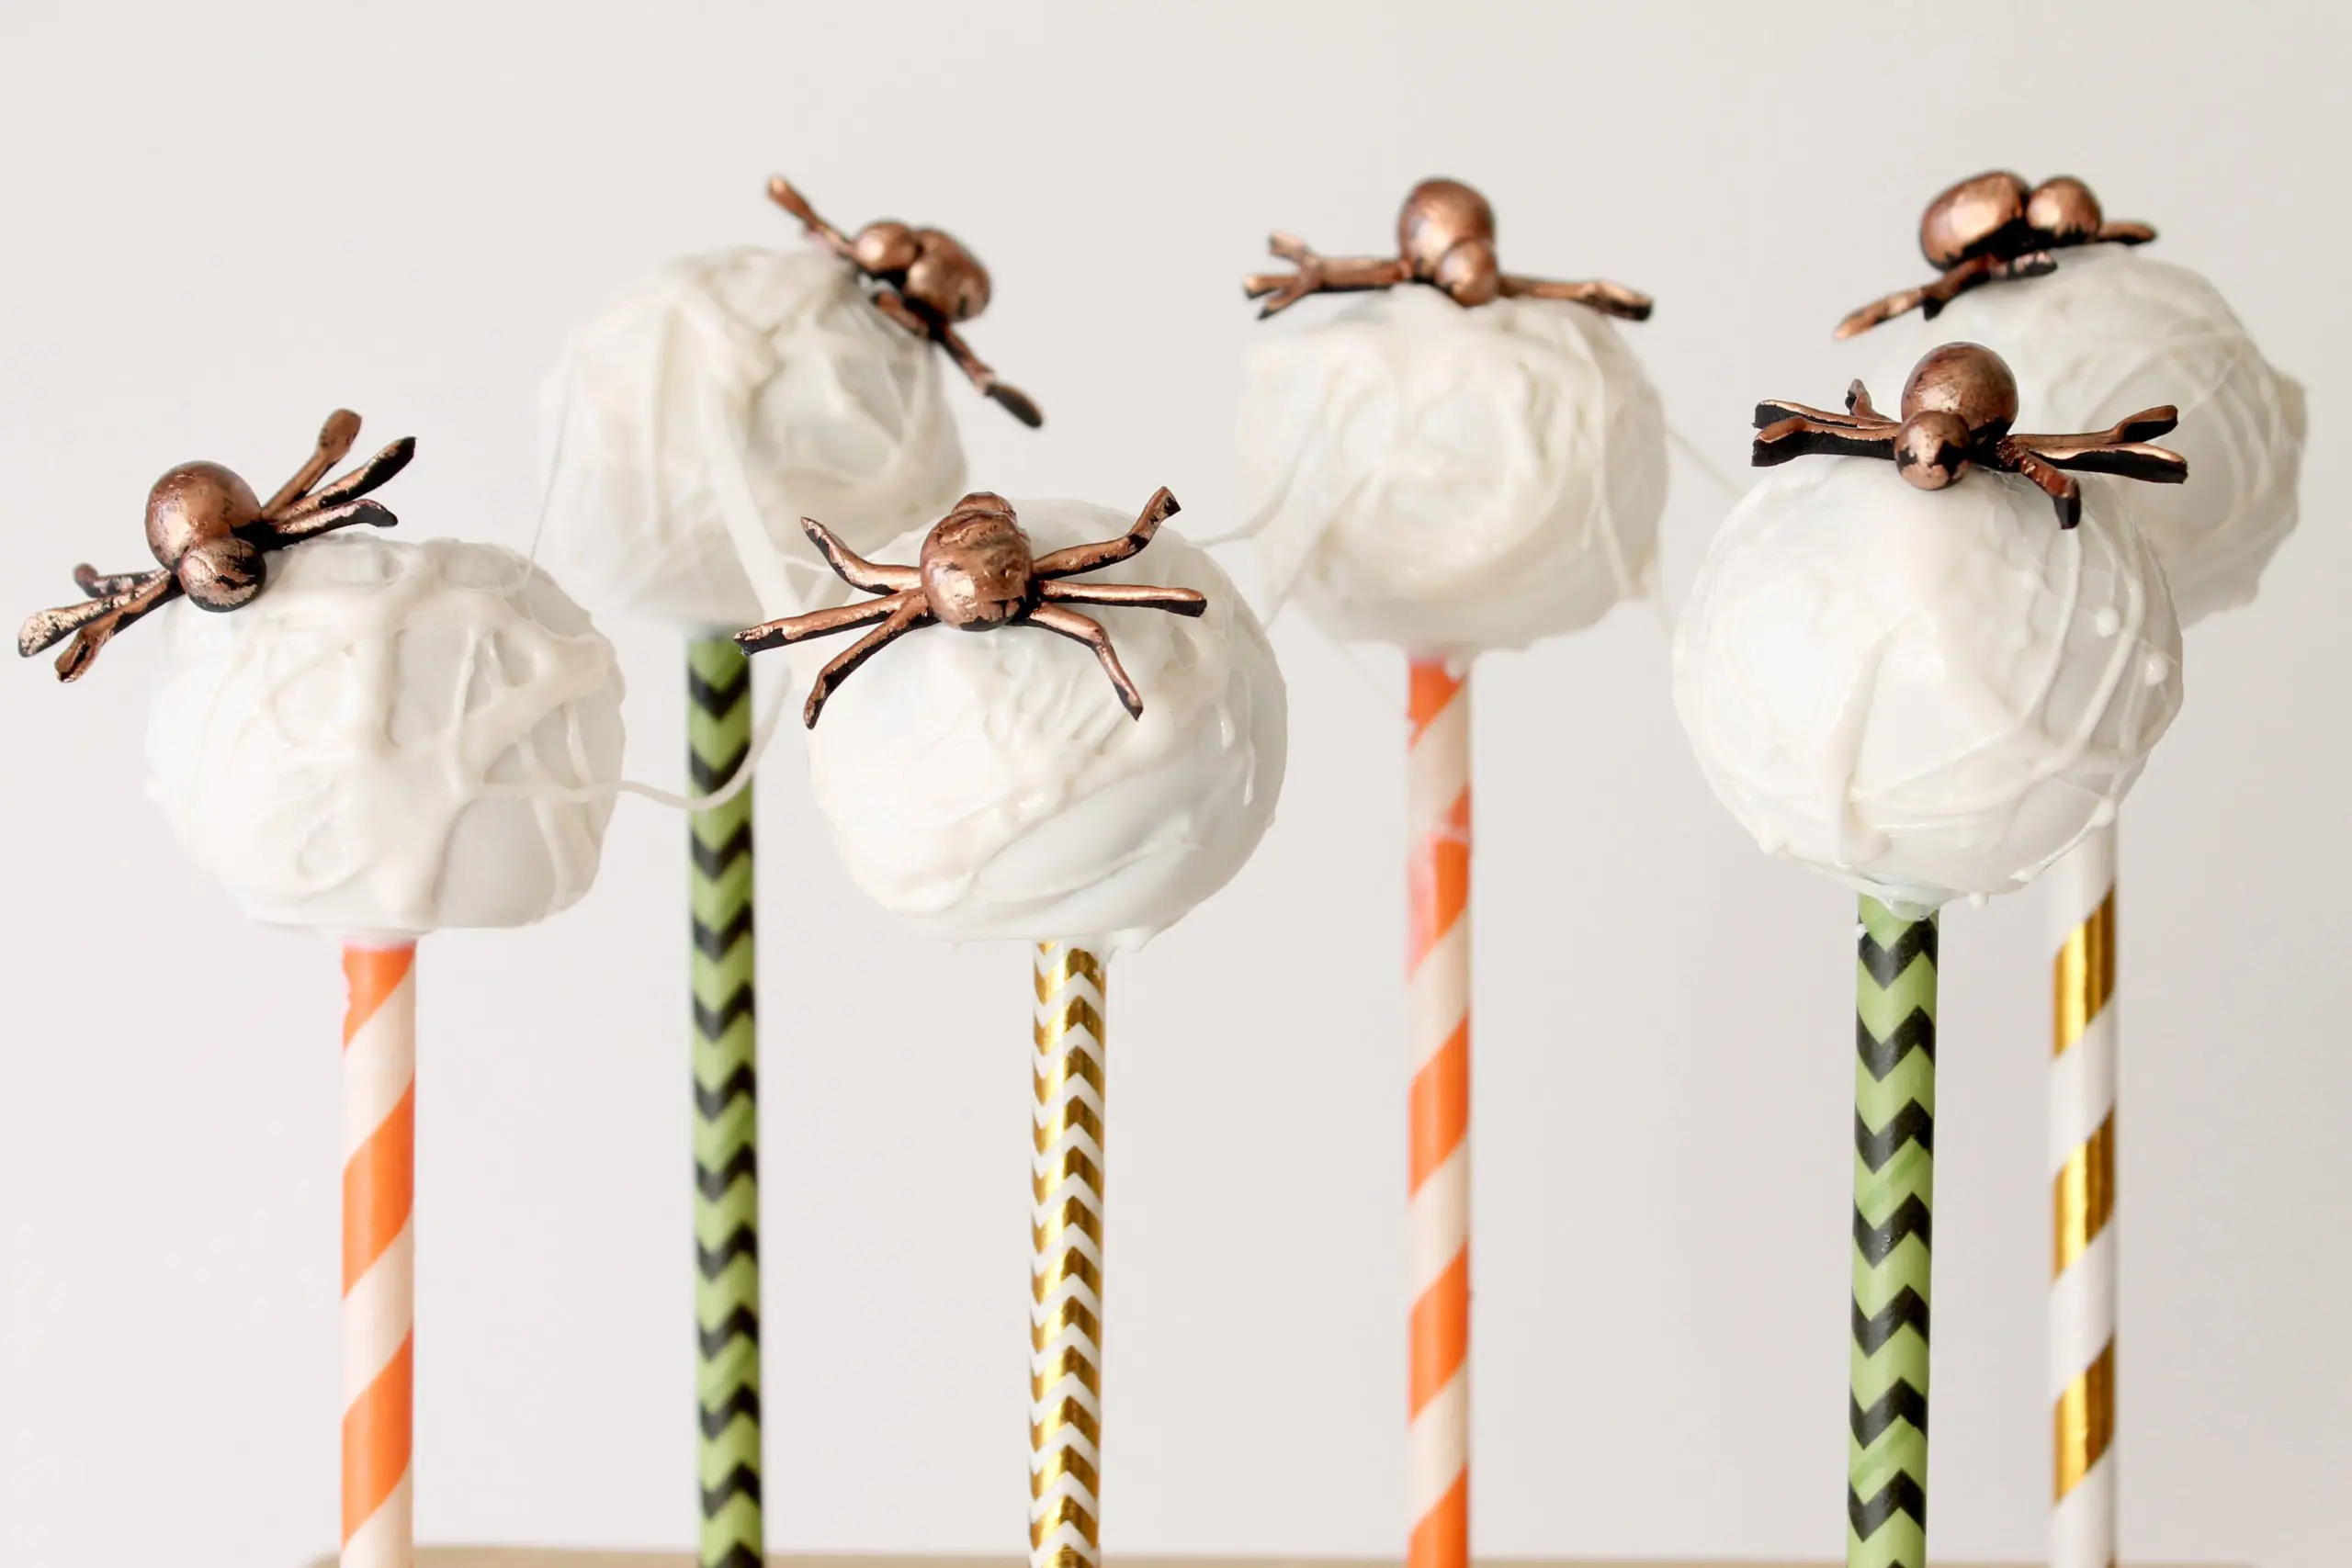 October 27th @ 6:00 PM - Hands-On Halloween Cake Pops w/ Jean – Lovetocook